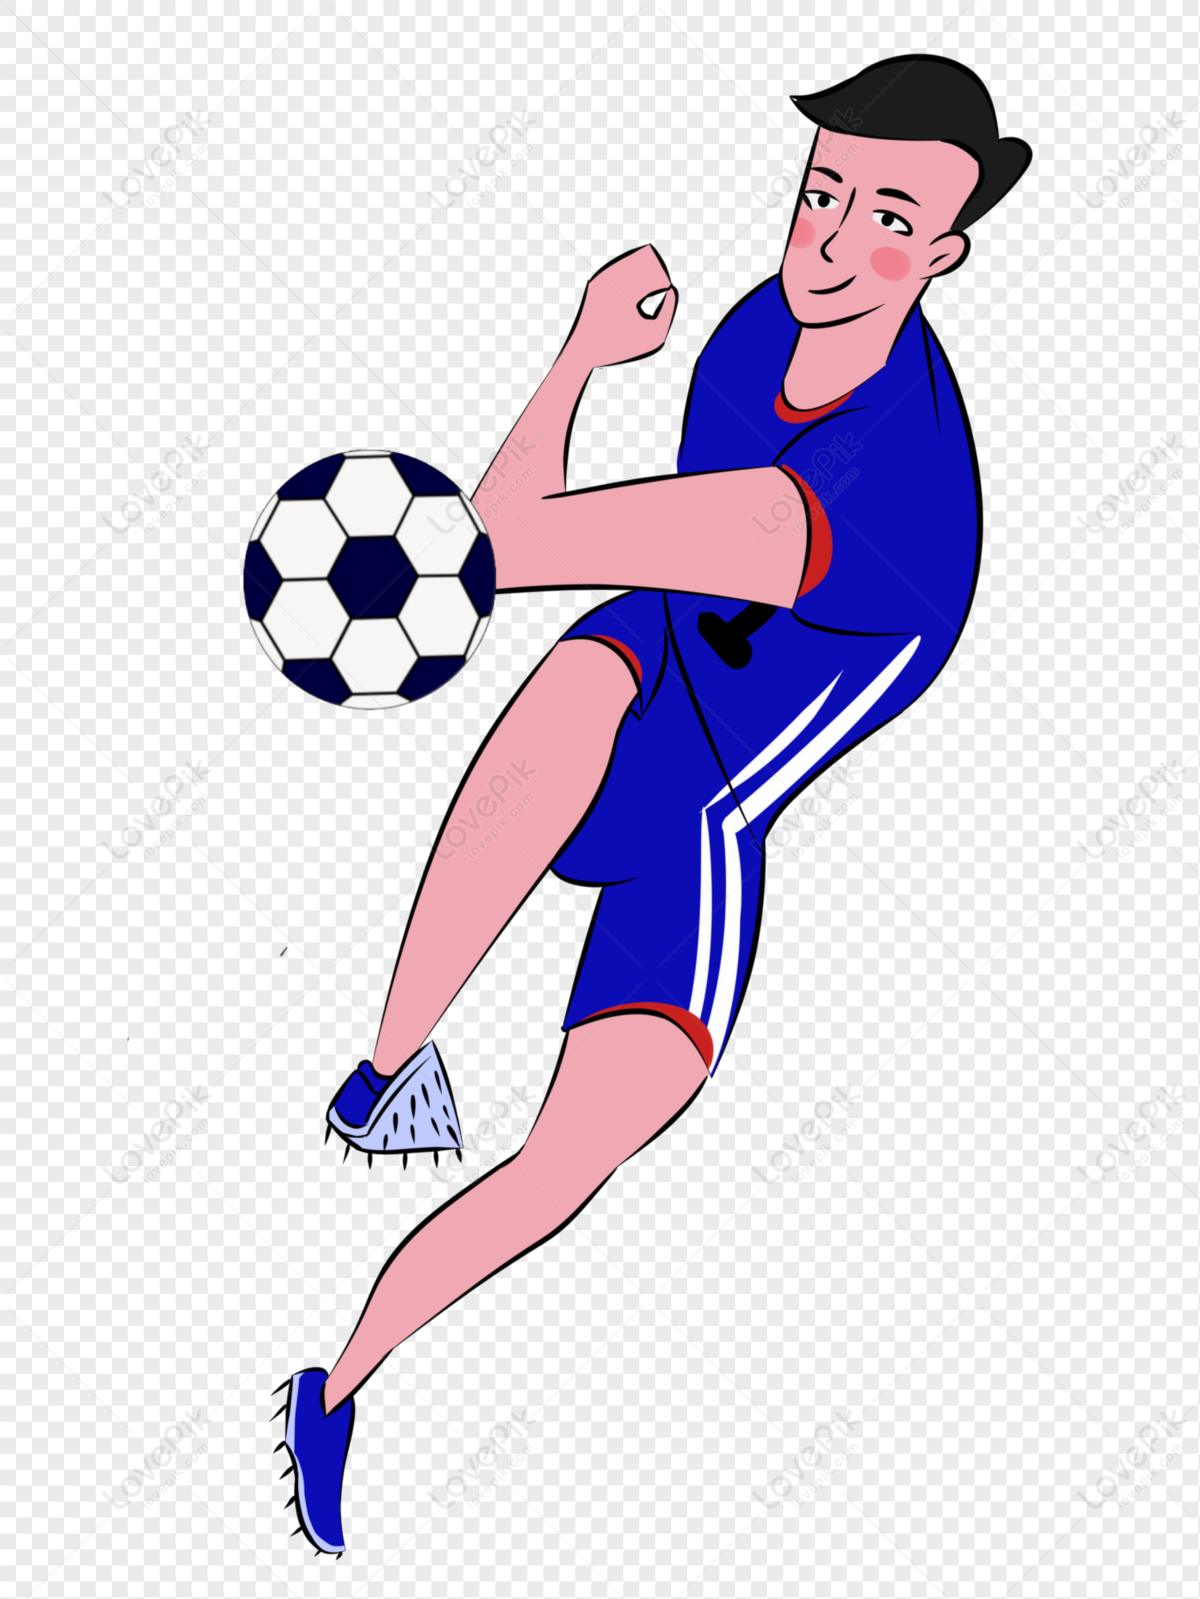 Cartoon Soccer png images